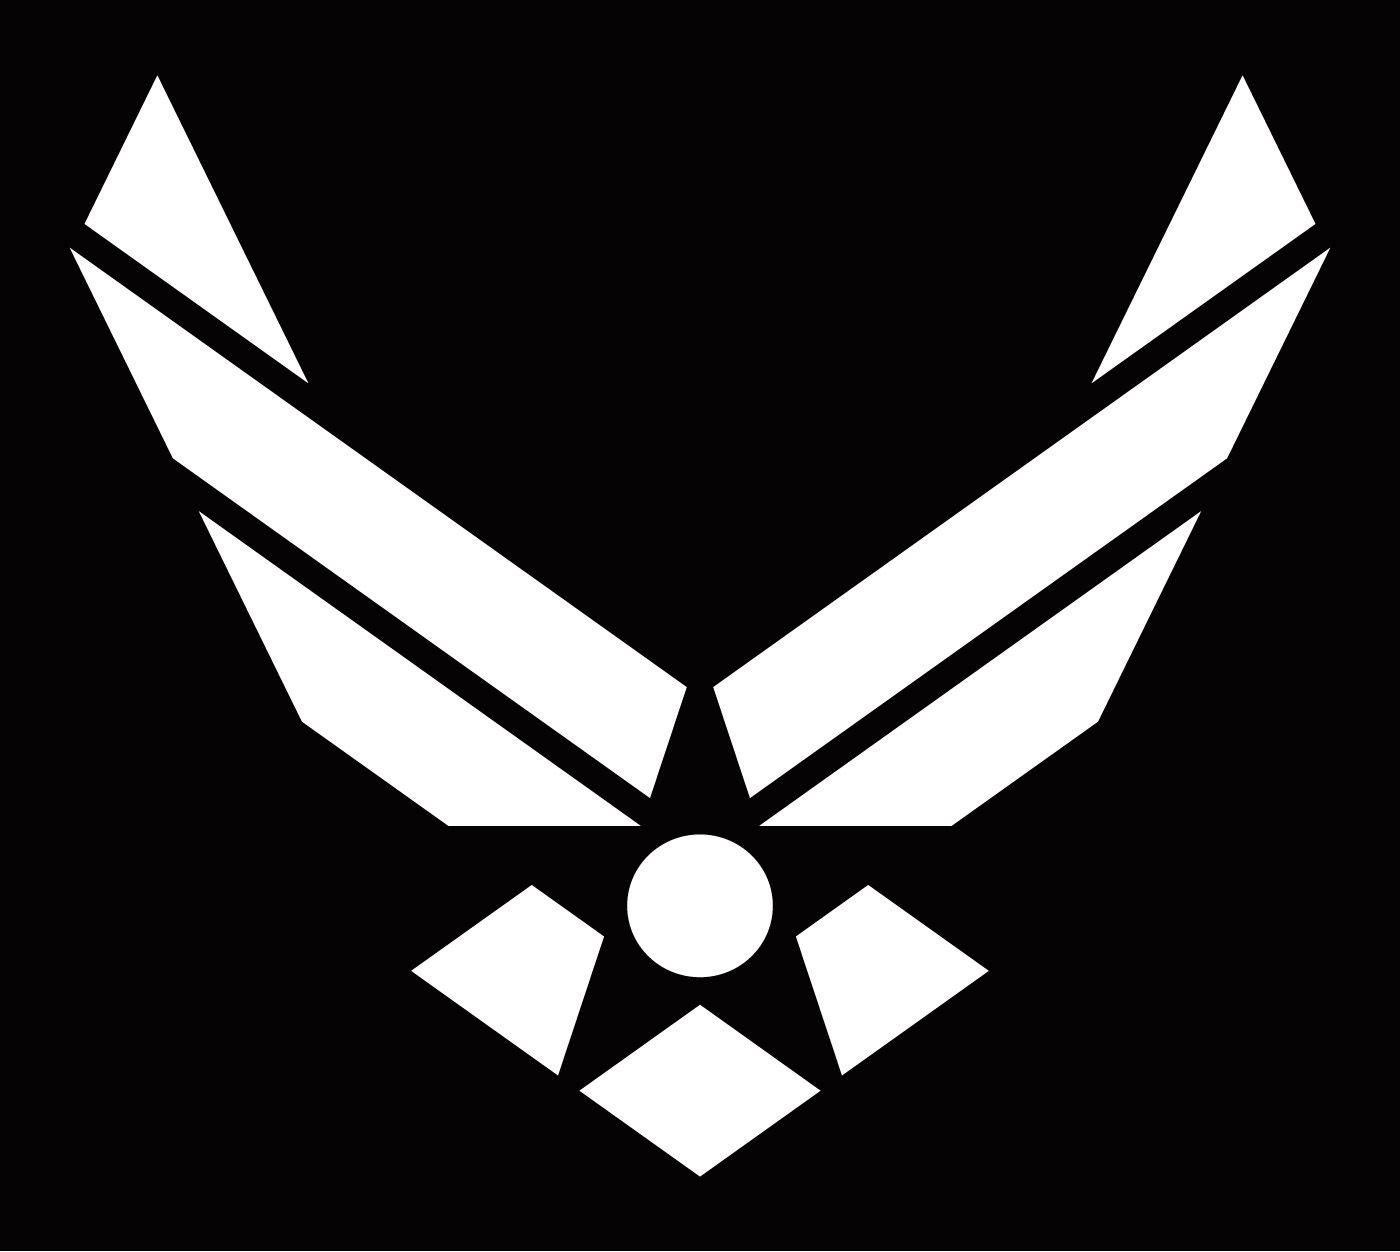 america flag with eagle and air force logo. Usaf symbol wallpaper